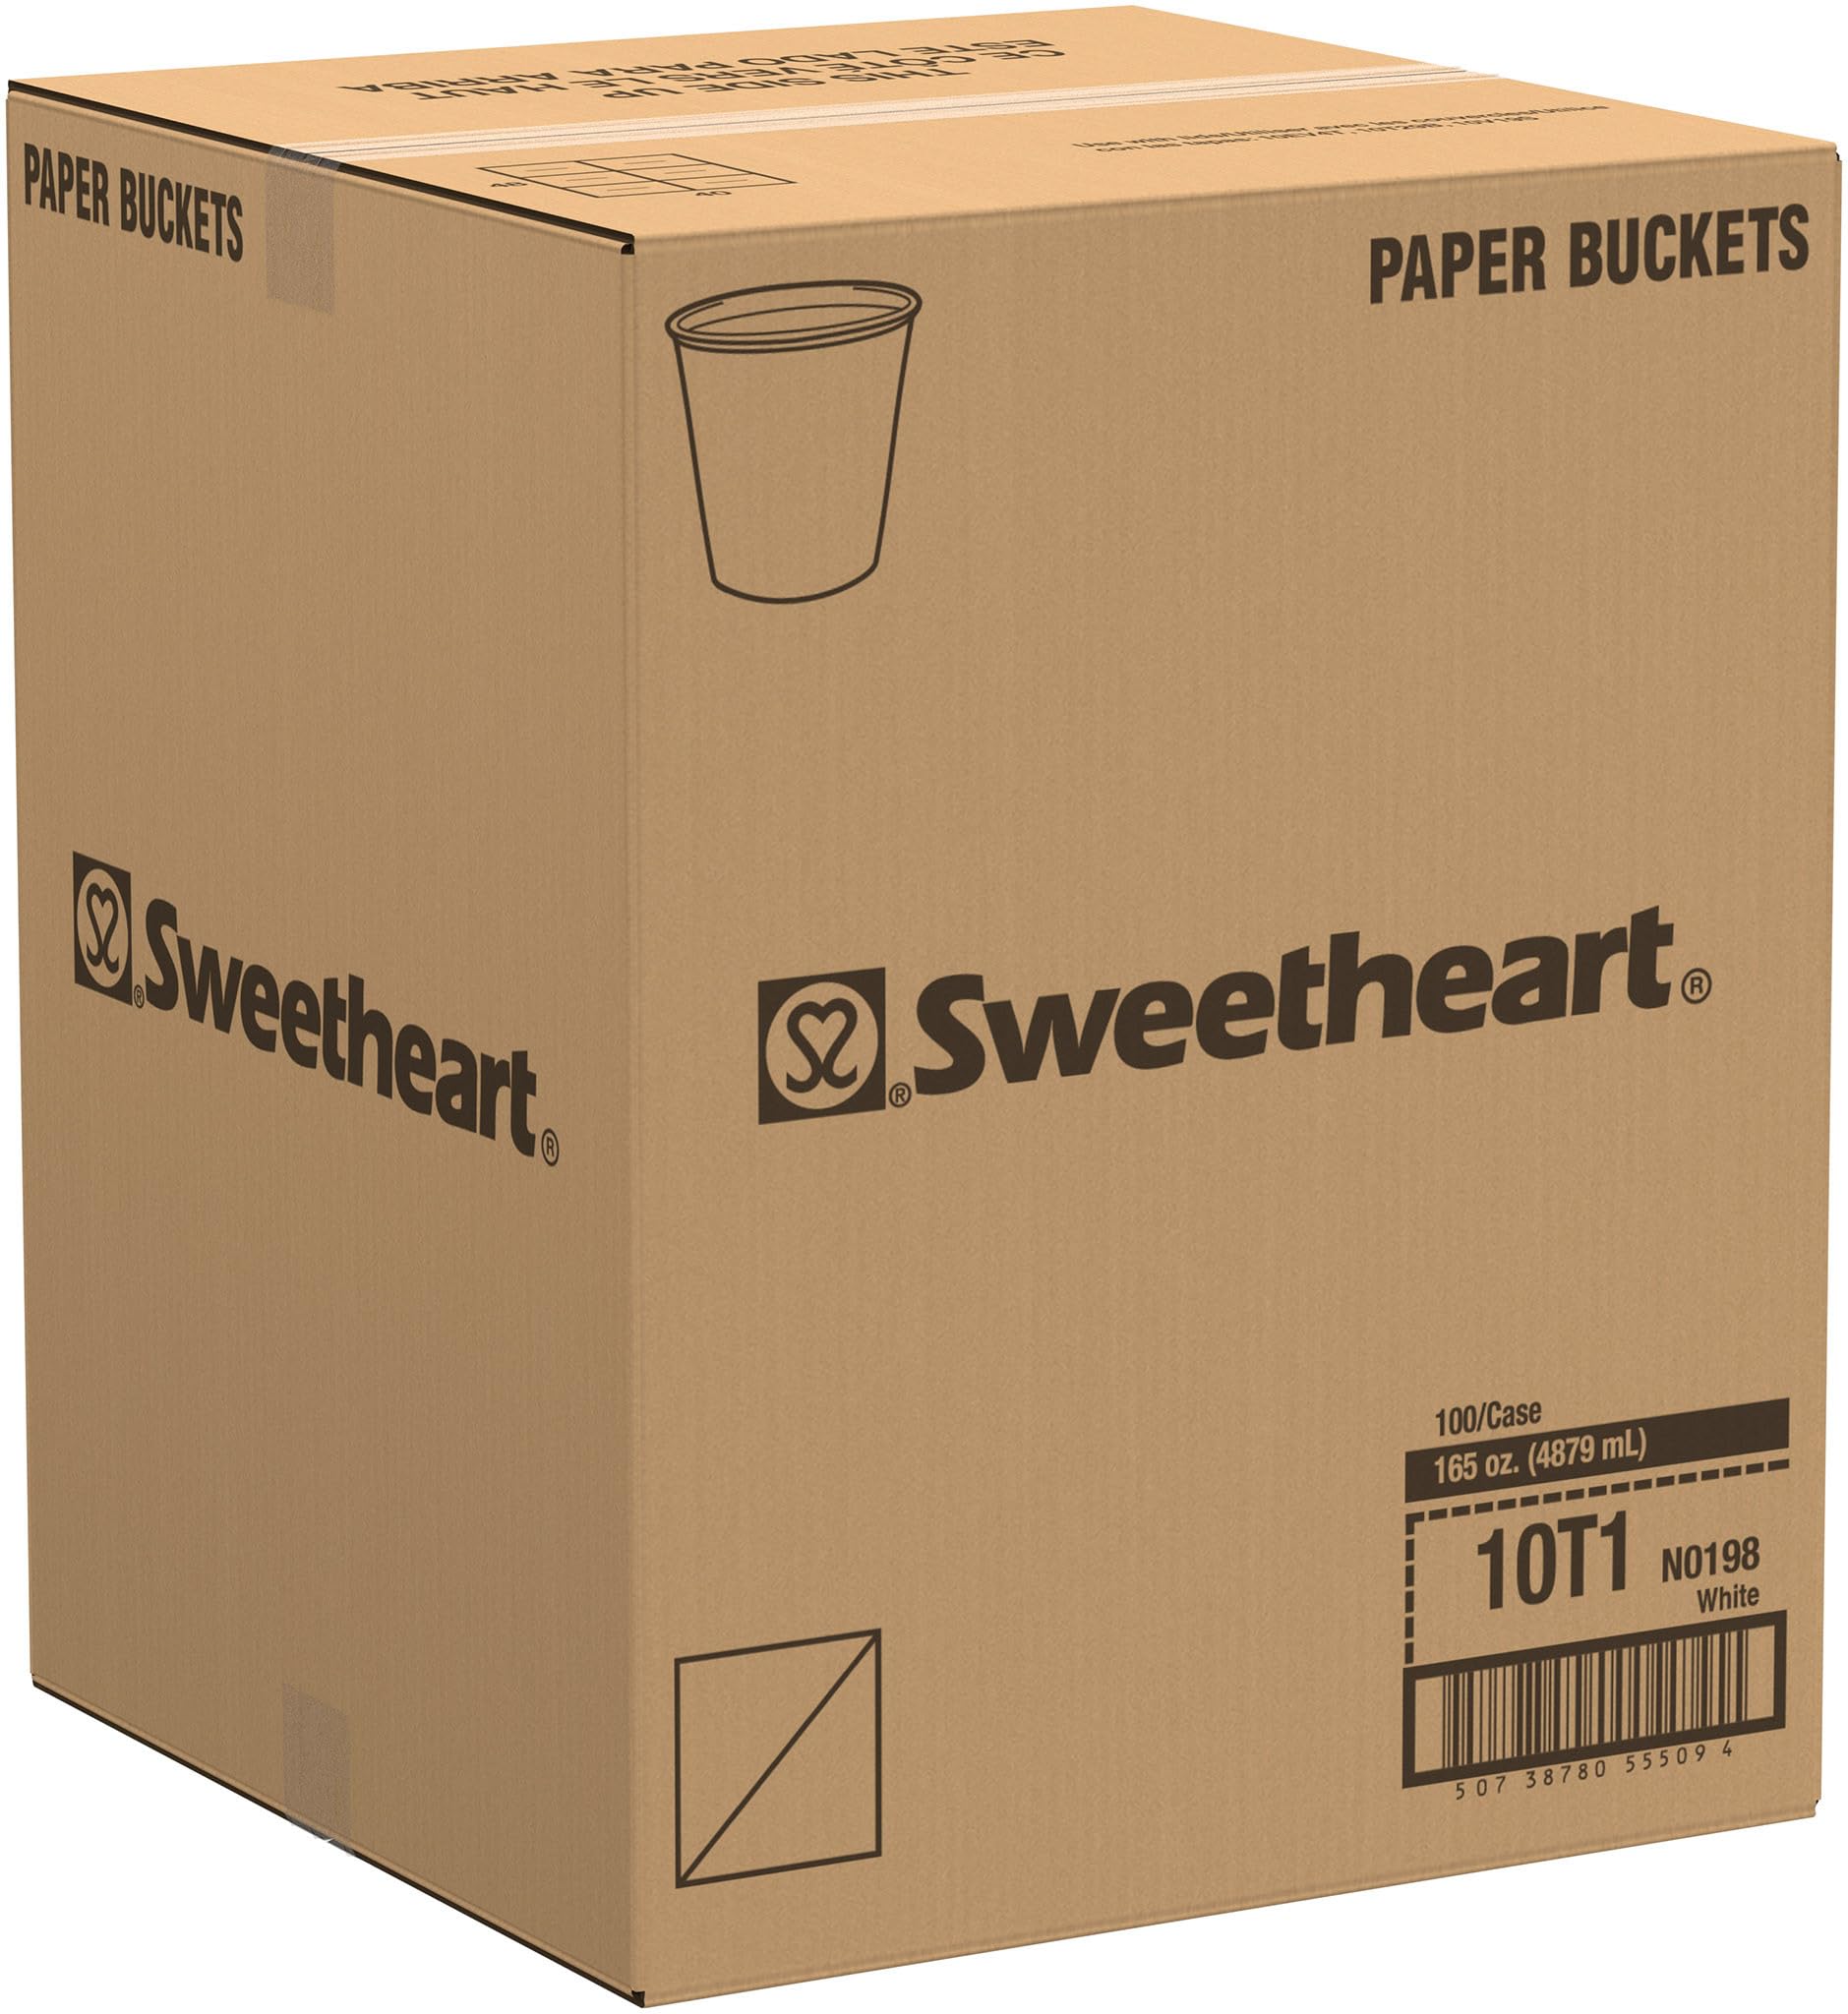 SOLO 10T1-N0198, 165oz Double Wrapped Paper Bucket, Unwaxed, White, 100/Carton, Sold As 1 Carton